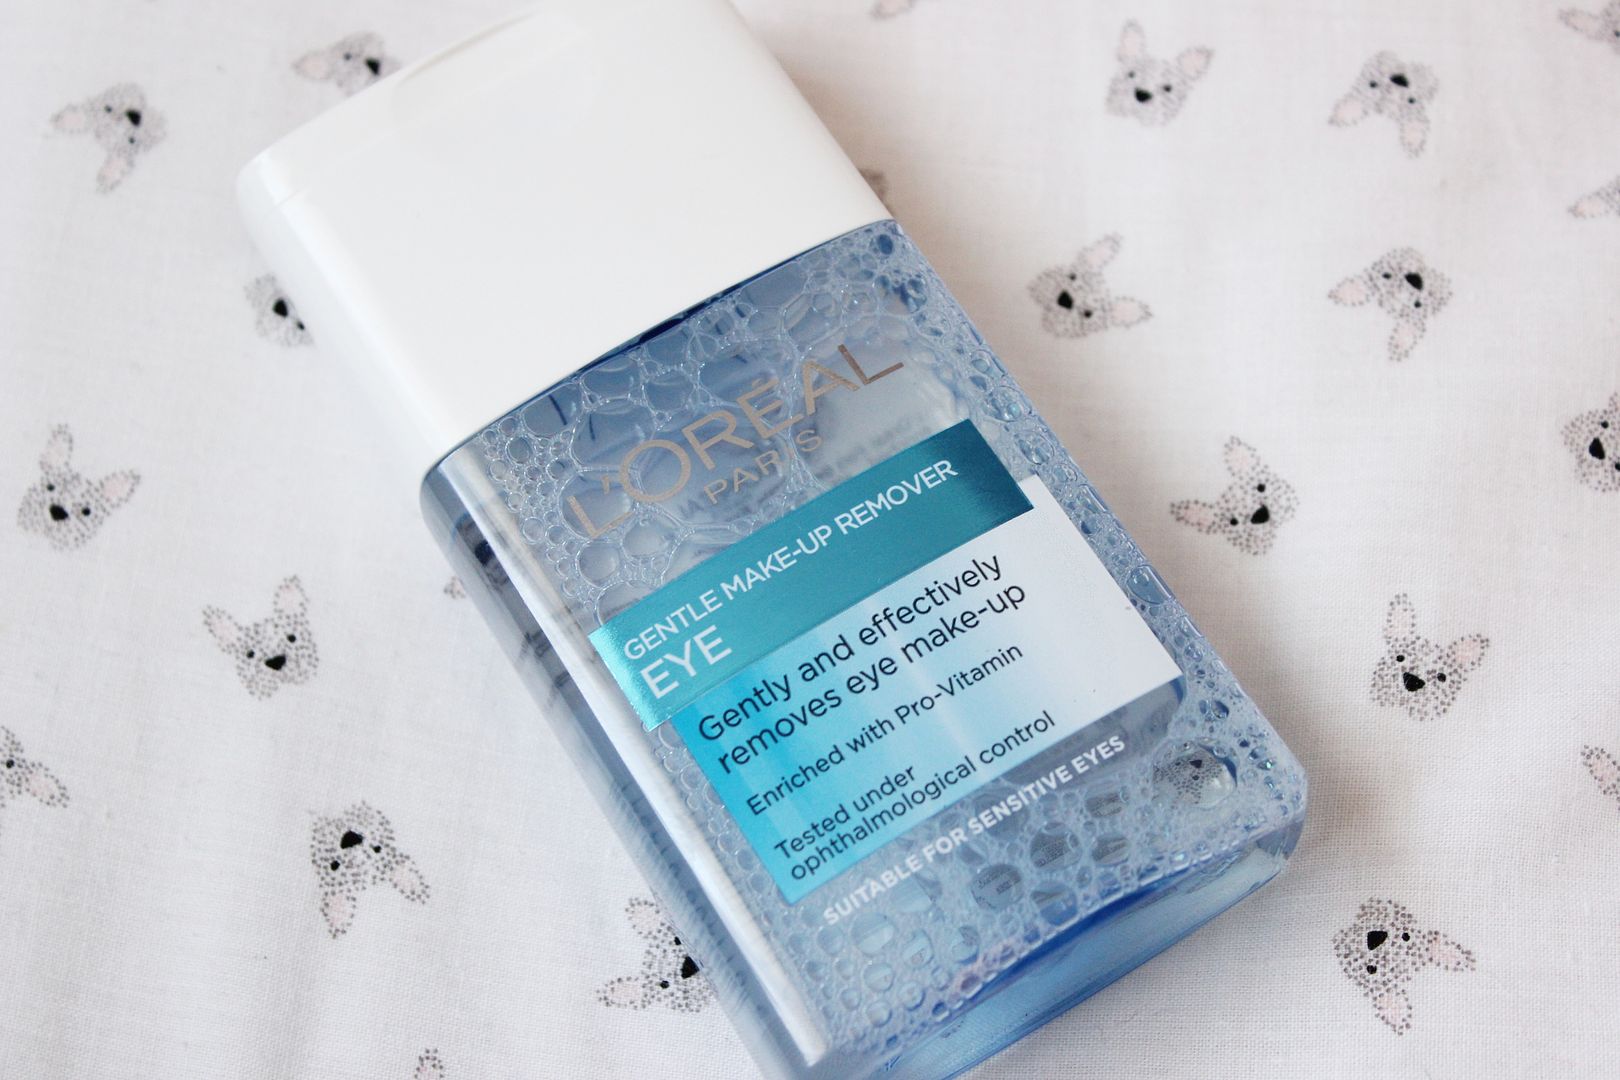 L'Oreal Gentle Eye Make-up Remover